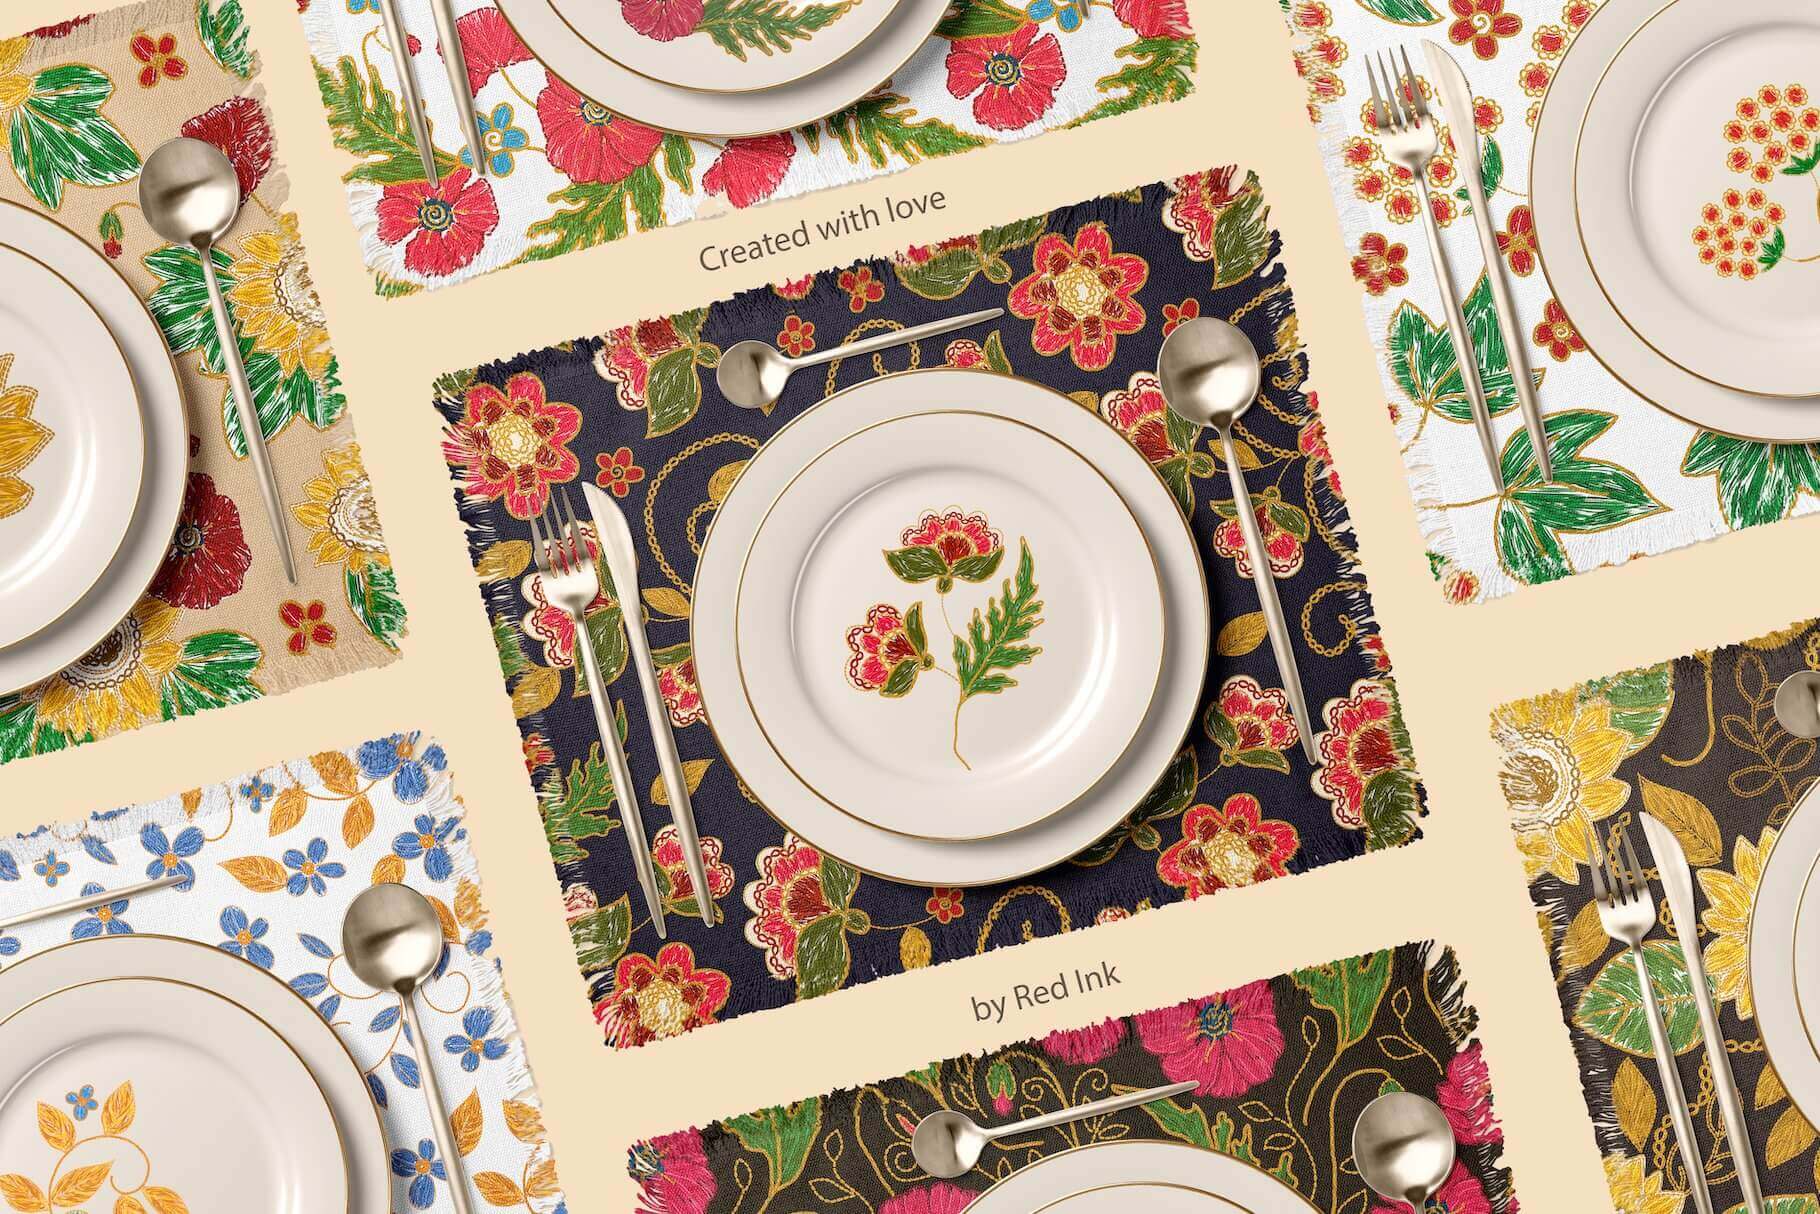 Floral Ukrainian design on a plate and tablecloth made with love.